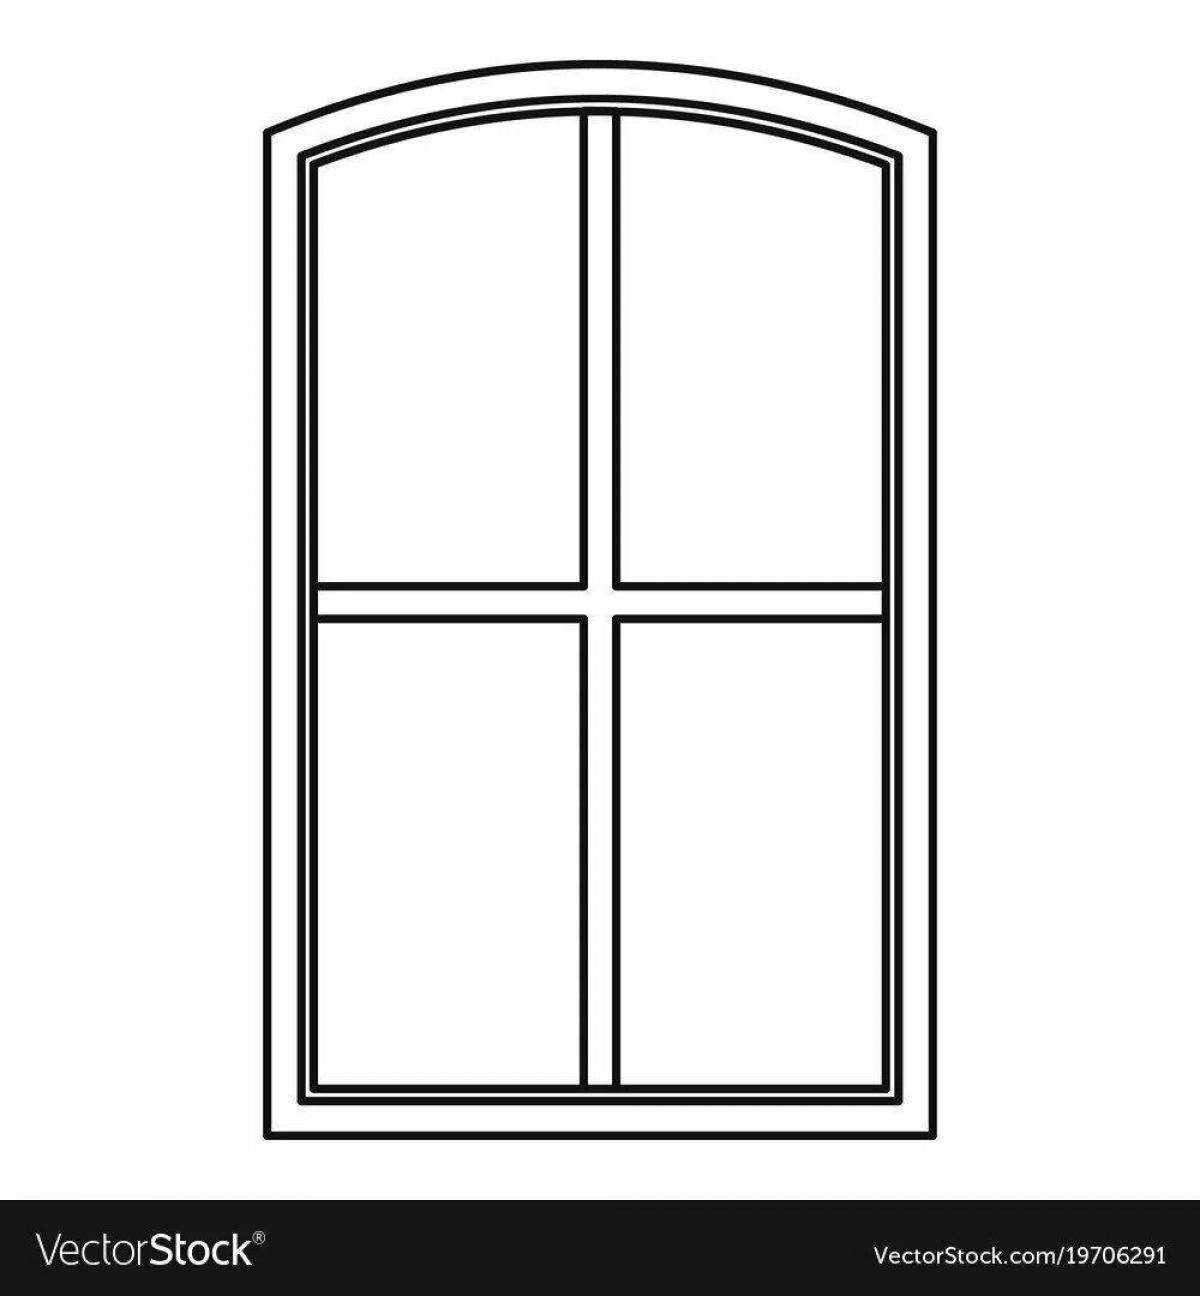 Playful window coloring page for kids